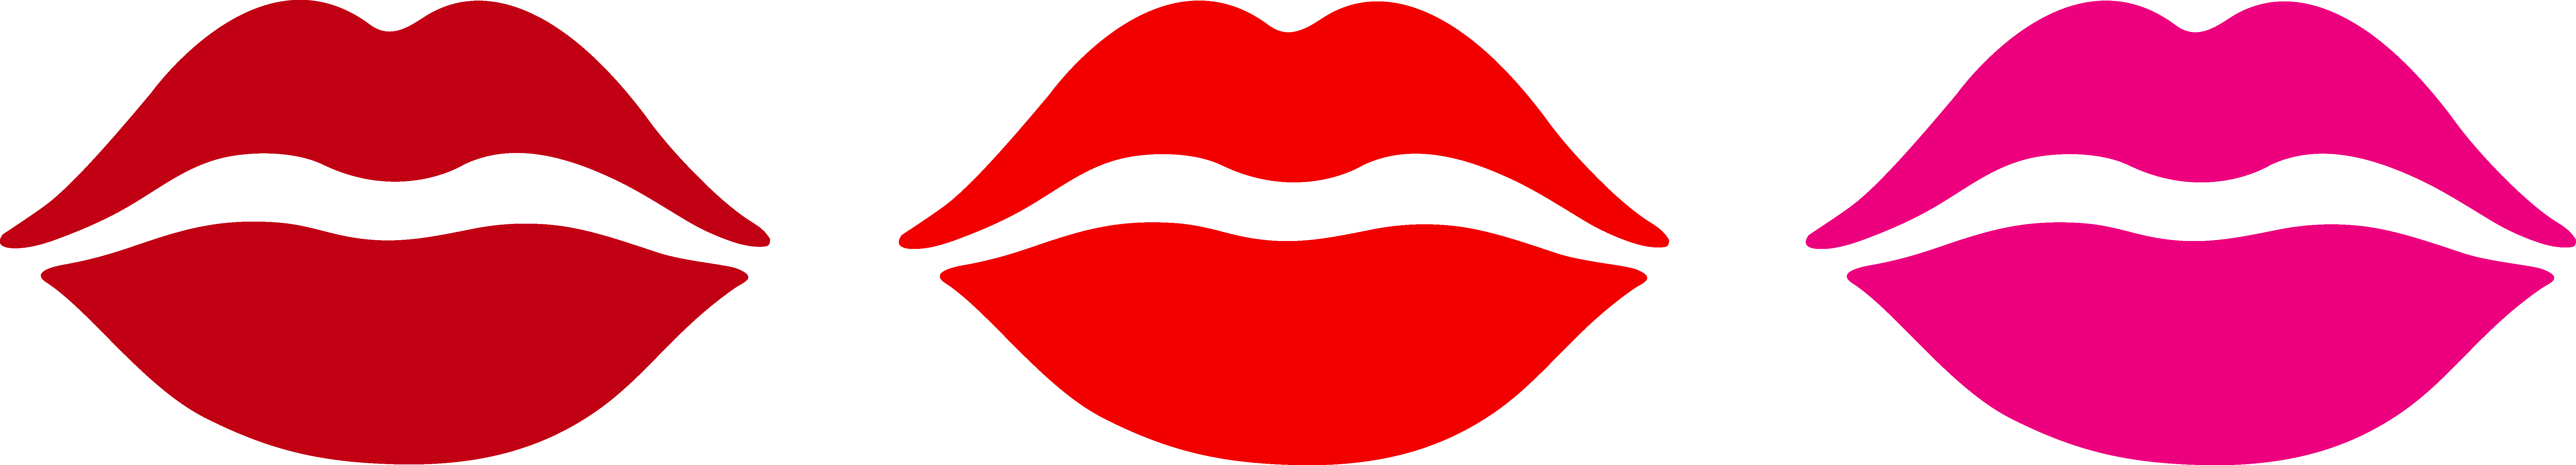 Pictures Of Cartoon Lips Download Png Image Clipart